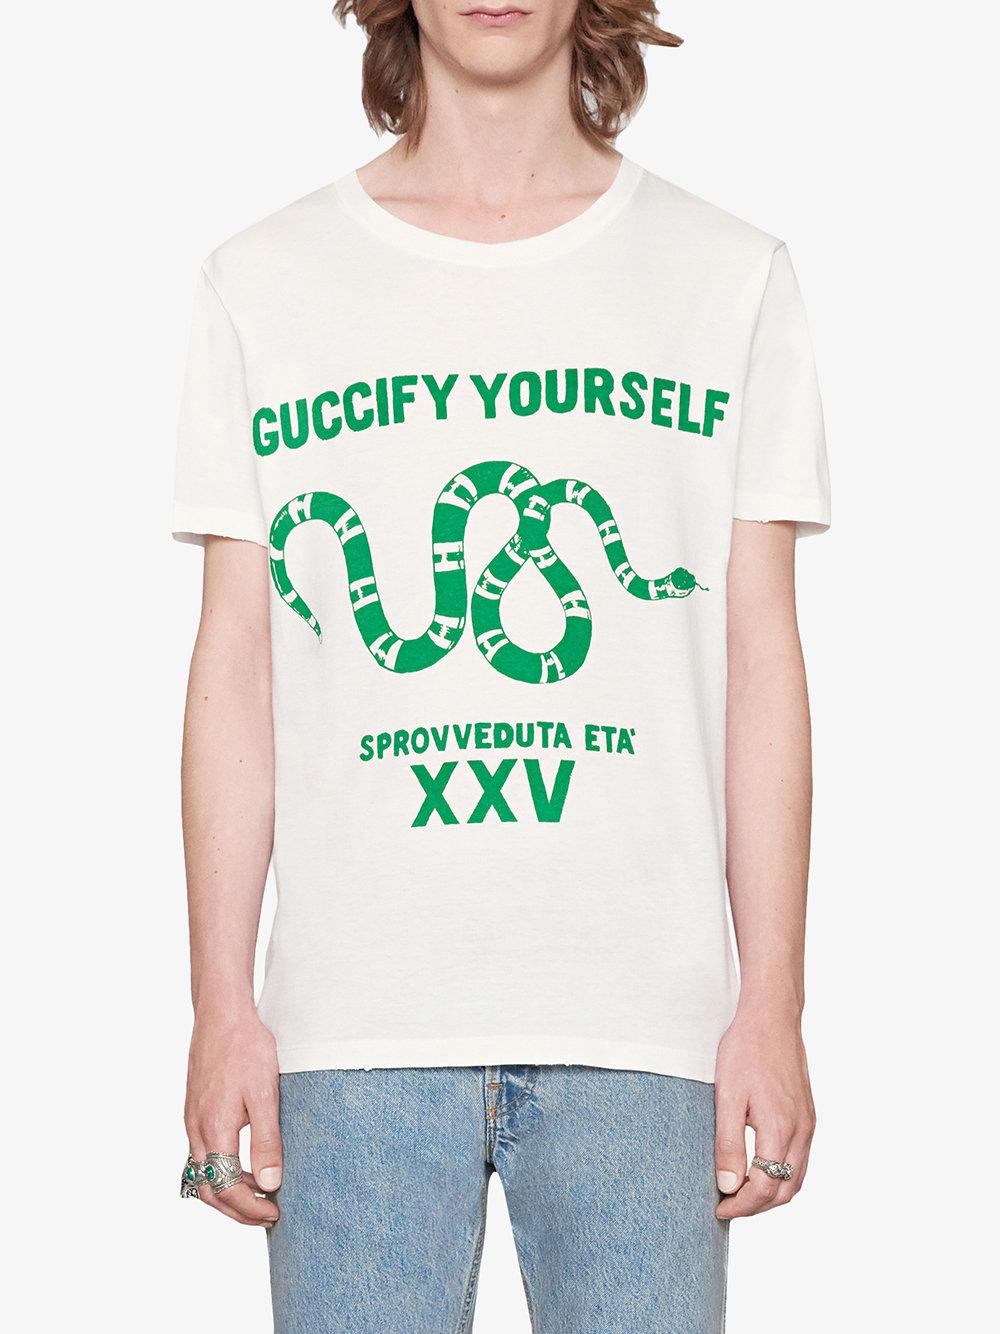 Gucci "fy Yourself" Print T-shirt for Men | Lyst